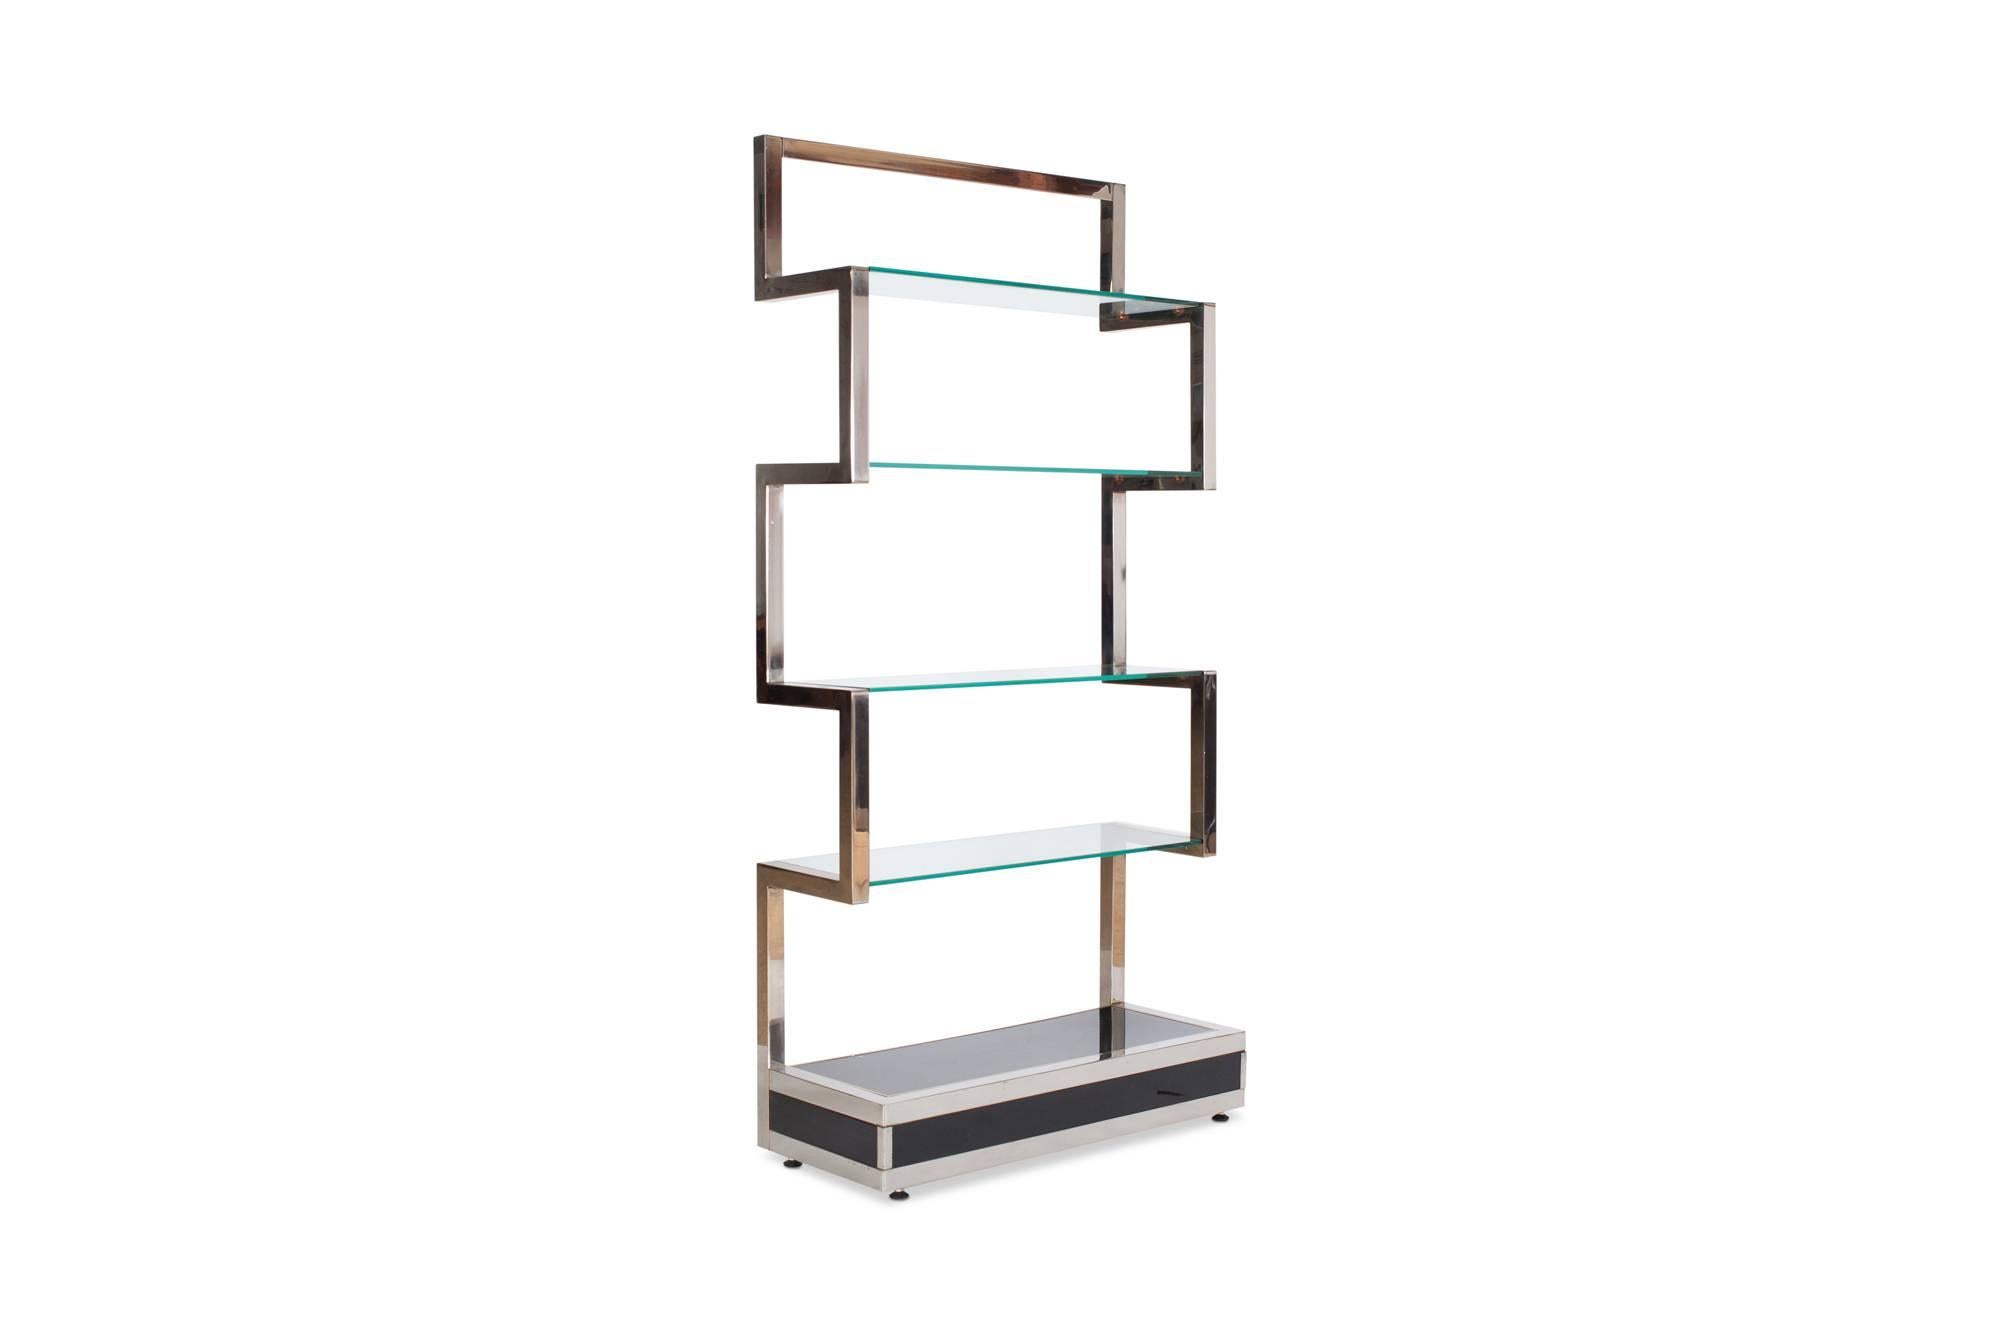 Chromed étagère by Belgo Chrome with clear glass shelving
A black lacquered base with geometrical sides in chrome

Highly decorative item

Belgium, 1980s

Measure: H 200 x W 76 cm x D 37cm.